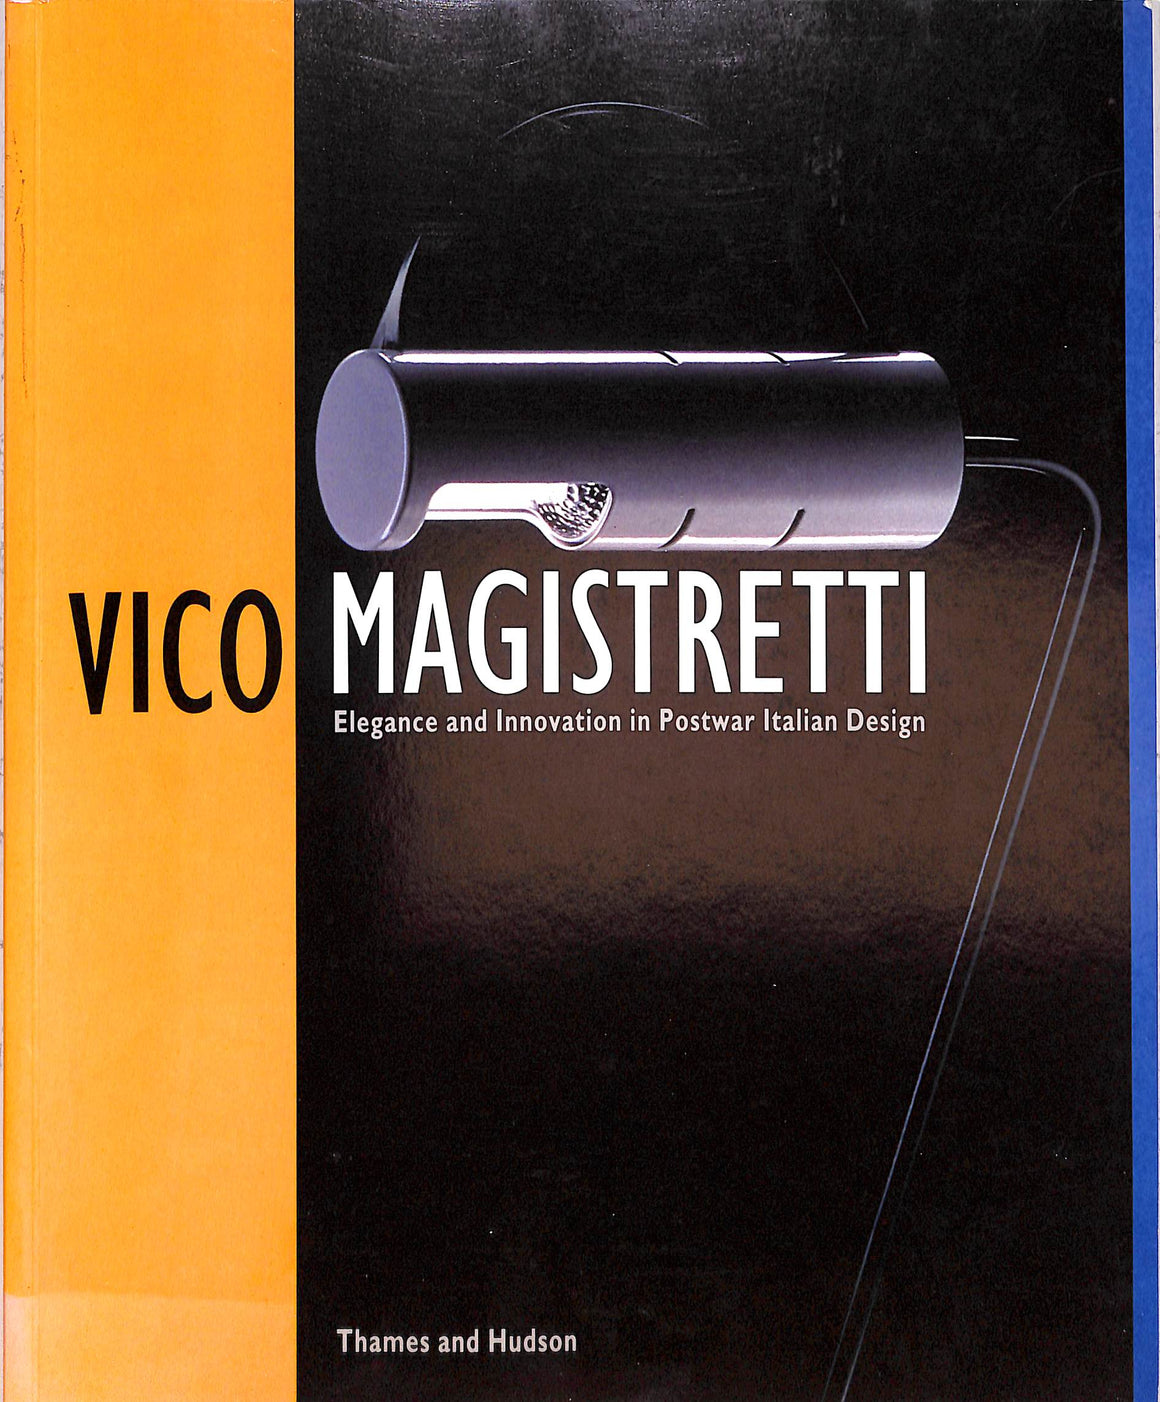 "Vico Magistretti Elegance And Innovation In Postwar Italian Design" 1991 PASCA, Vanni [text by] (SOLD)